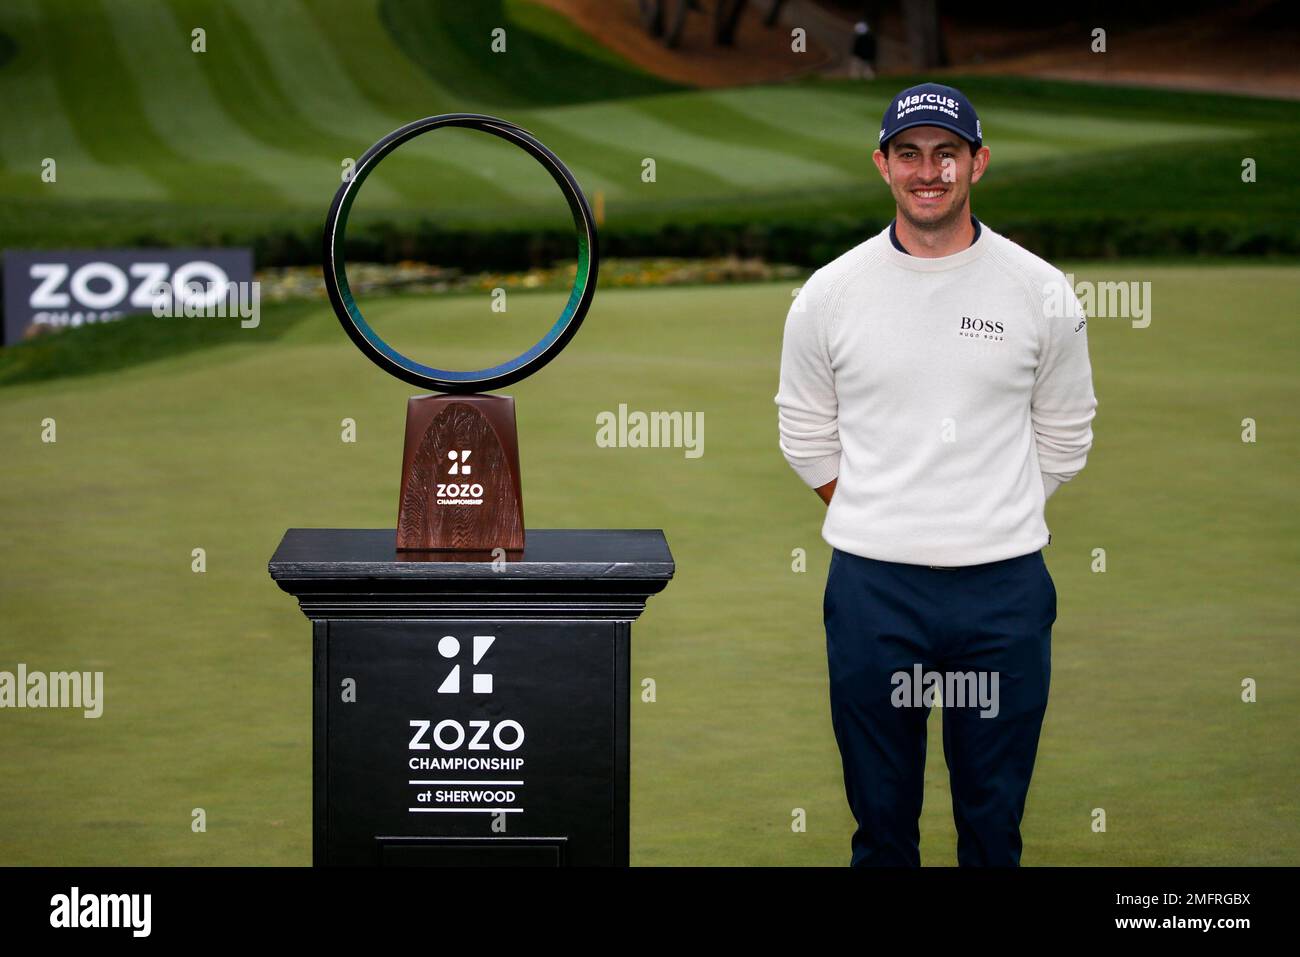 Patrick Cantlay poses with his trophy after winning the Zozo Championship golf tournament Sunday, Oct. 25, 2020, in Thousand Oaks, Calif